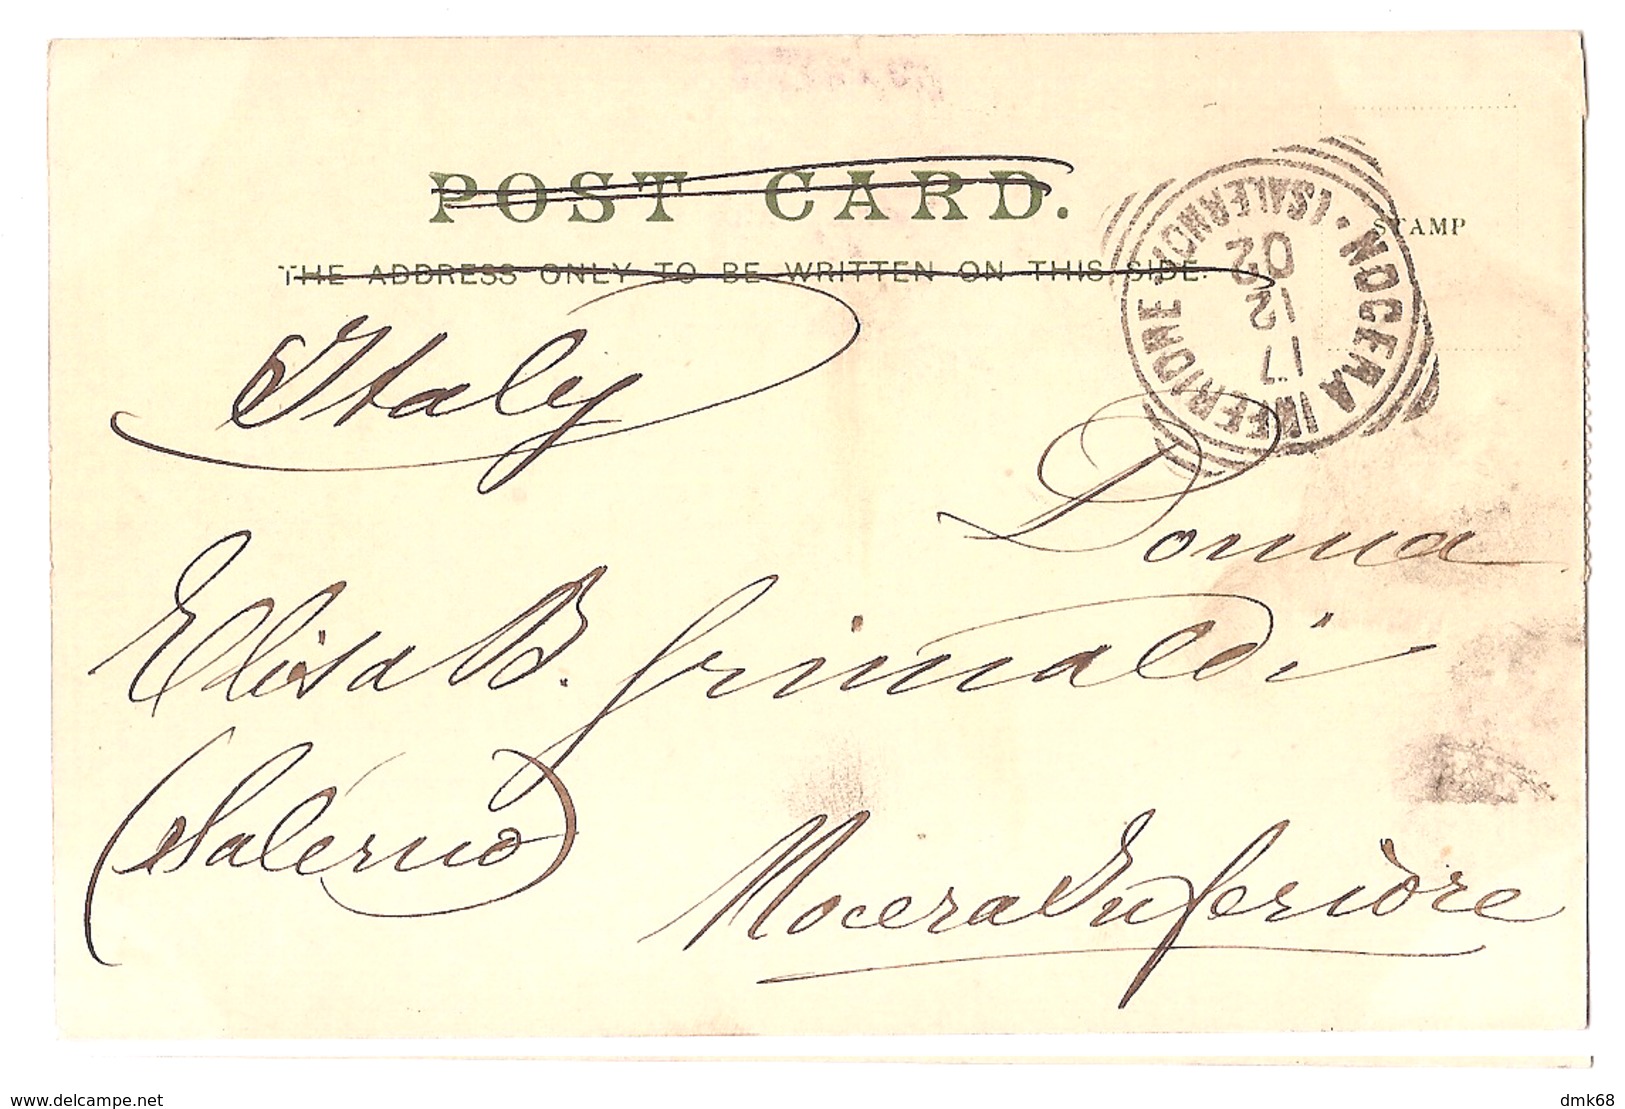 SOUTH AFRICA - PORT ELIZABETH - DONKIN MONUMENT AND RESERVE - STAMP - MAILED TO ITALY 1902 - ( 2782) - South Africa